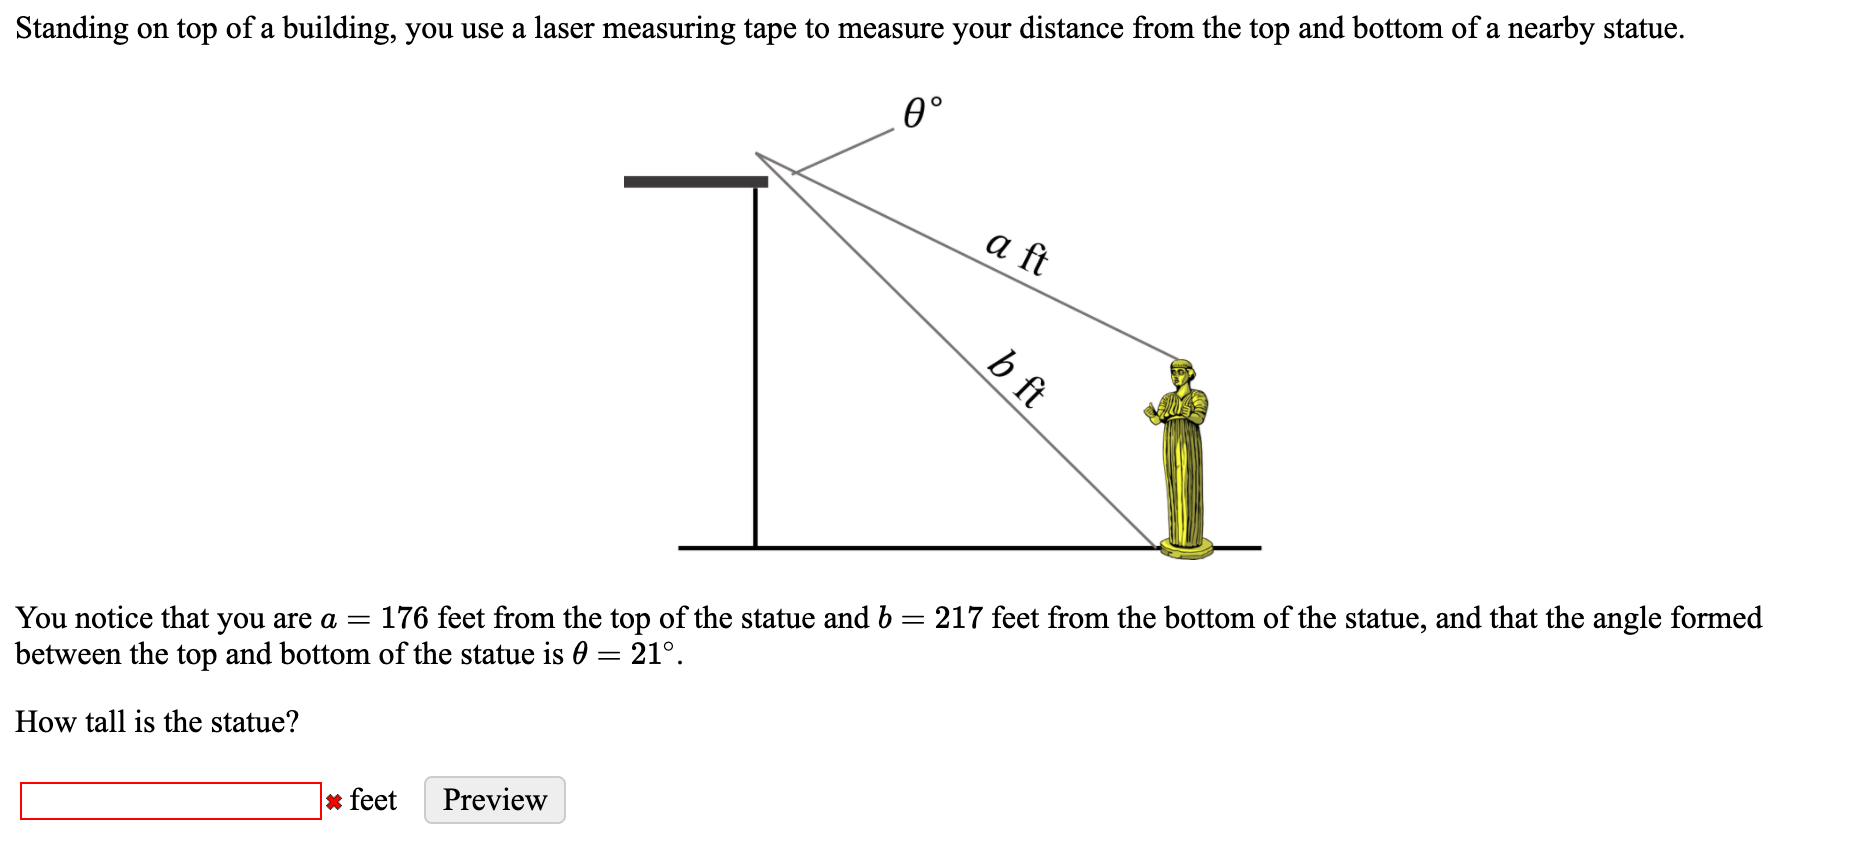 Standing on top of a building, you use a laser measuring tape to measure your distance from the top and bottom of a nearby statue.
0°
a ft
:176 feet from the top of the statue and b = 217 feet from the bottom of the statue, and that the angle formed
You notice that you are a =
between the top and bottom of the statue is 0 = 21°.
How tall is the statue?
b ft
